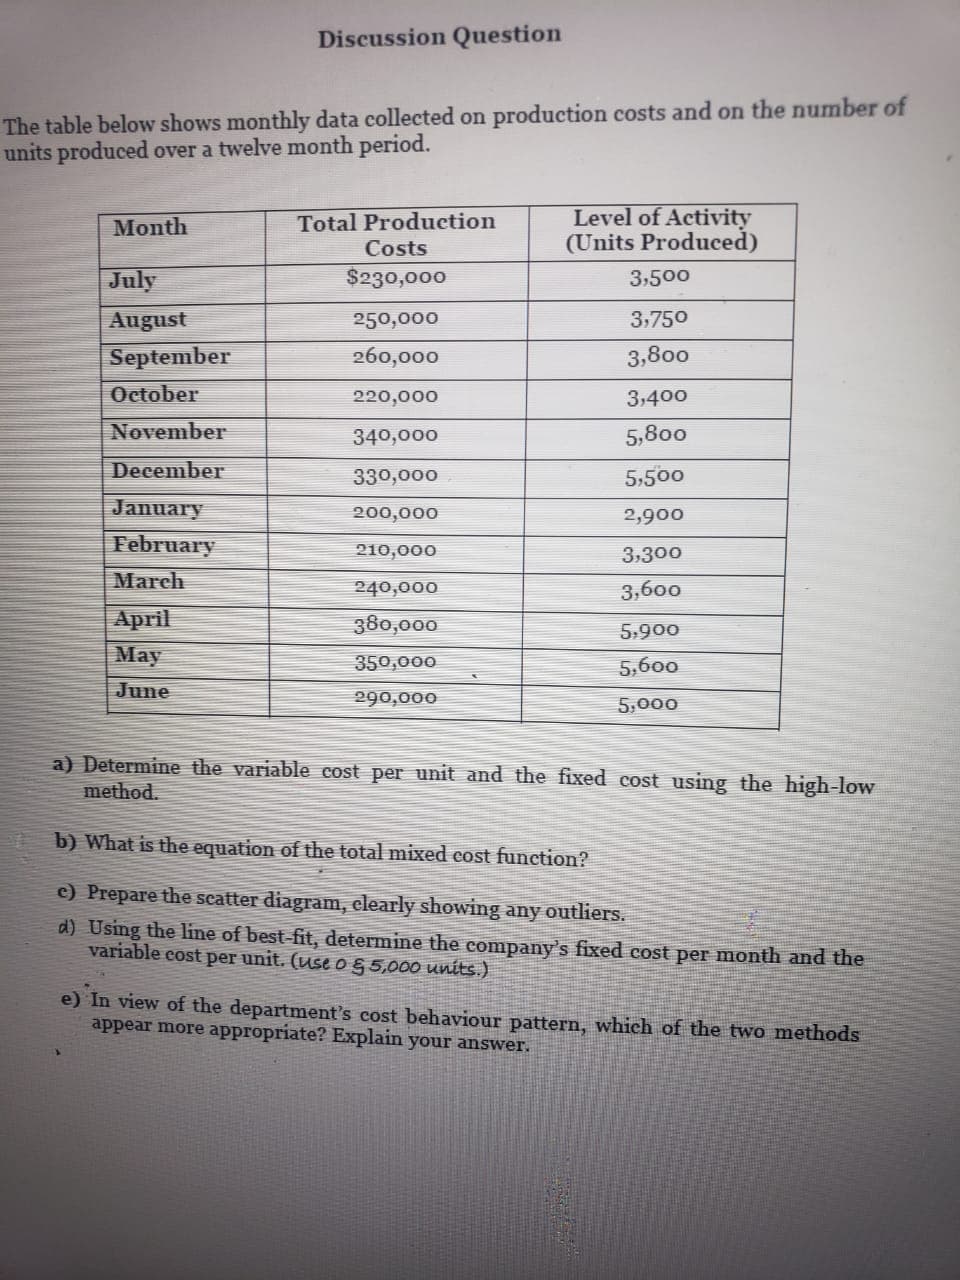 Discussion Question
The table below shows monthly data collected on production costs and on the number of
units produced over a twelve month period.
Level of Activity
(Units Produced)
Month
Total Production
Costs
July
$230,000
3,500
August
250,000
3,750
September
October
260,000
3,800
220,000
3,400
November
340,000
5,800
December
330,000
5,500
January
200,000
2,900
February
210,000
3,300
March
240,000
3,600
April
380,000
5,900
May
350,000
5,600
June
290,000
5,000
a) Determine the variable cost per unit and the fixed cost using the high-low
method.
b) What is the equation of the total mixed cost function?
c) Prepare the scatter diagram, clearly showing any outliers.
d) Using the line of best-fit, determine the company's fixed cost per month and the
variable cost per unit. (use o 5 5,000 units.)
e) In view of the department's cost behaviour pattern, which of the two methods
appear more appropriate? Explain your answer.
